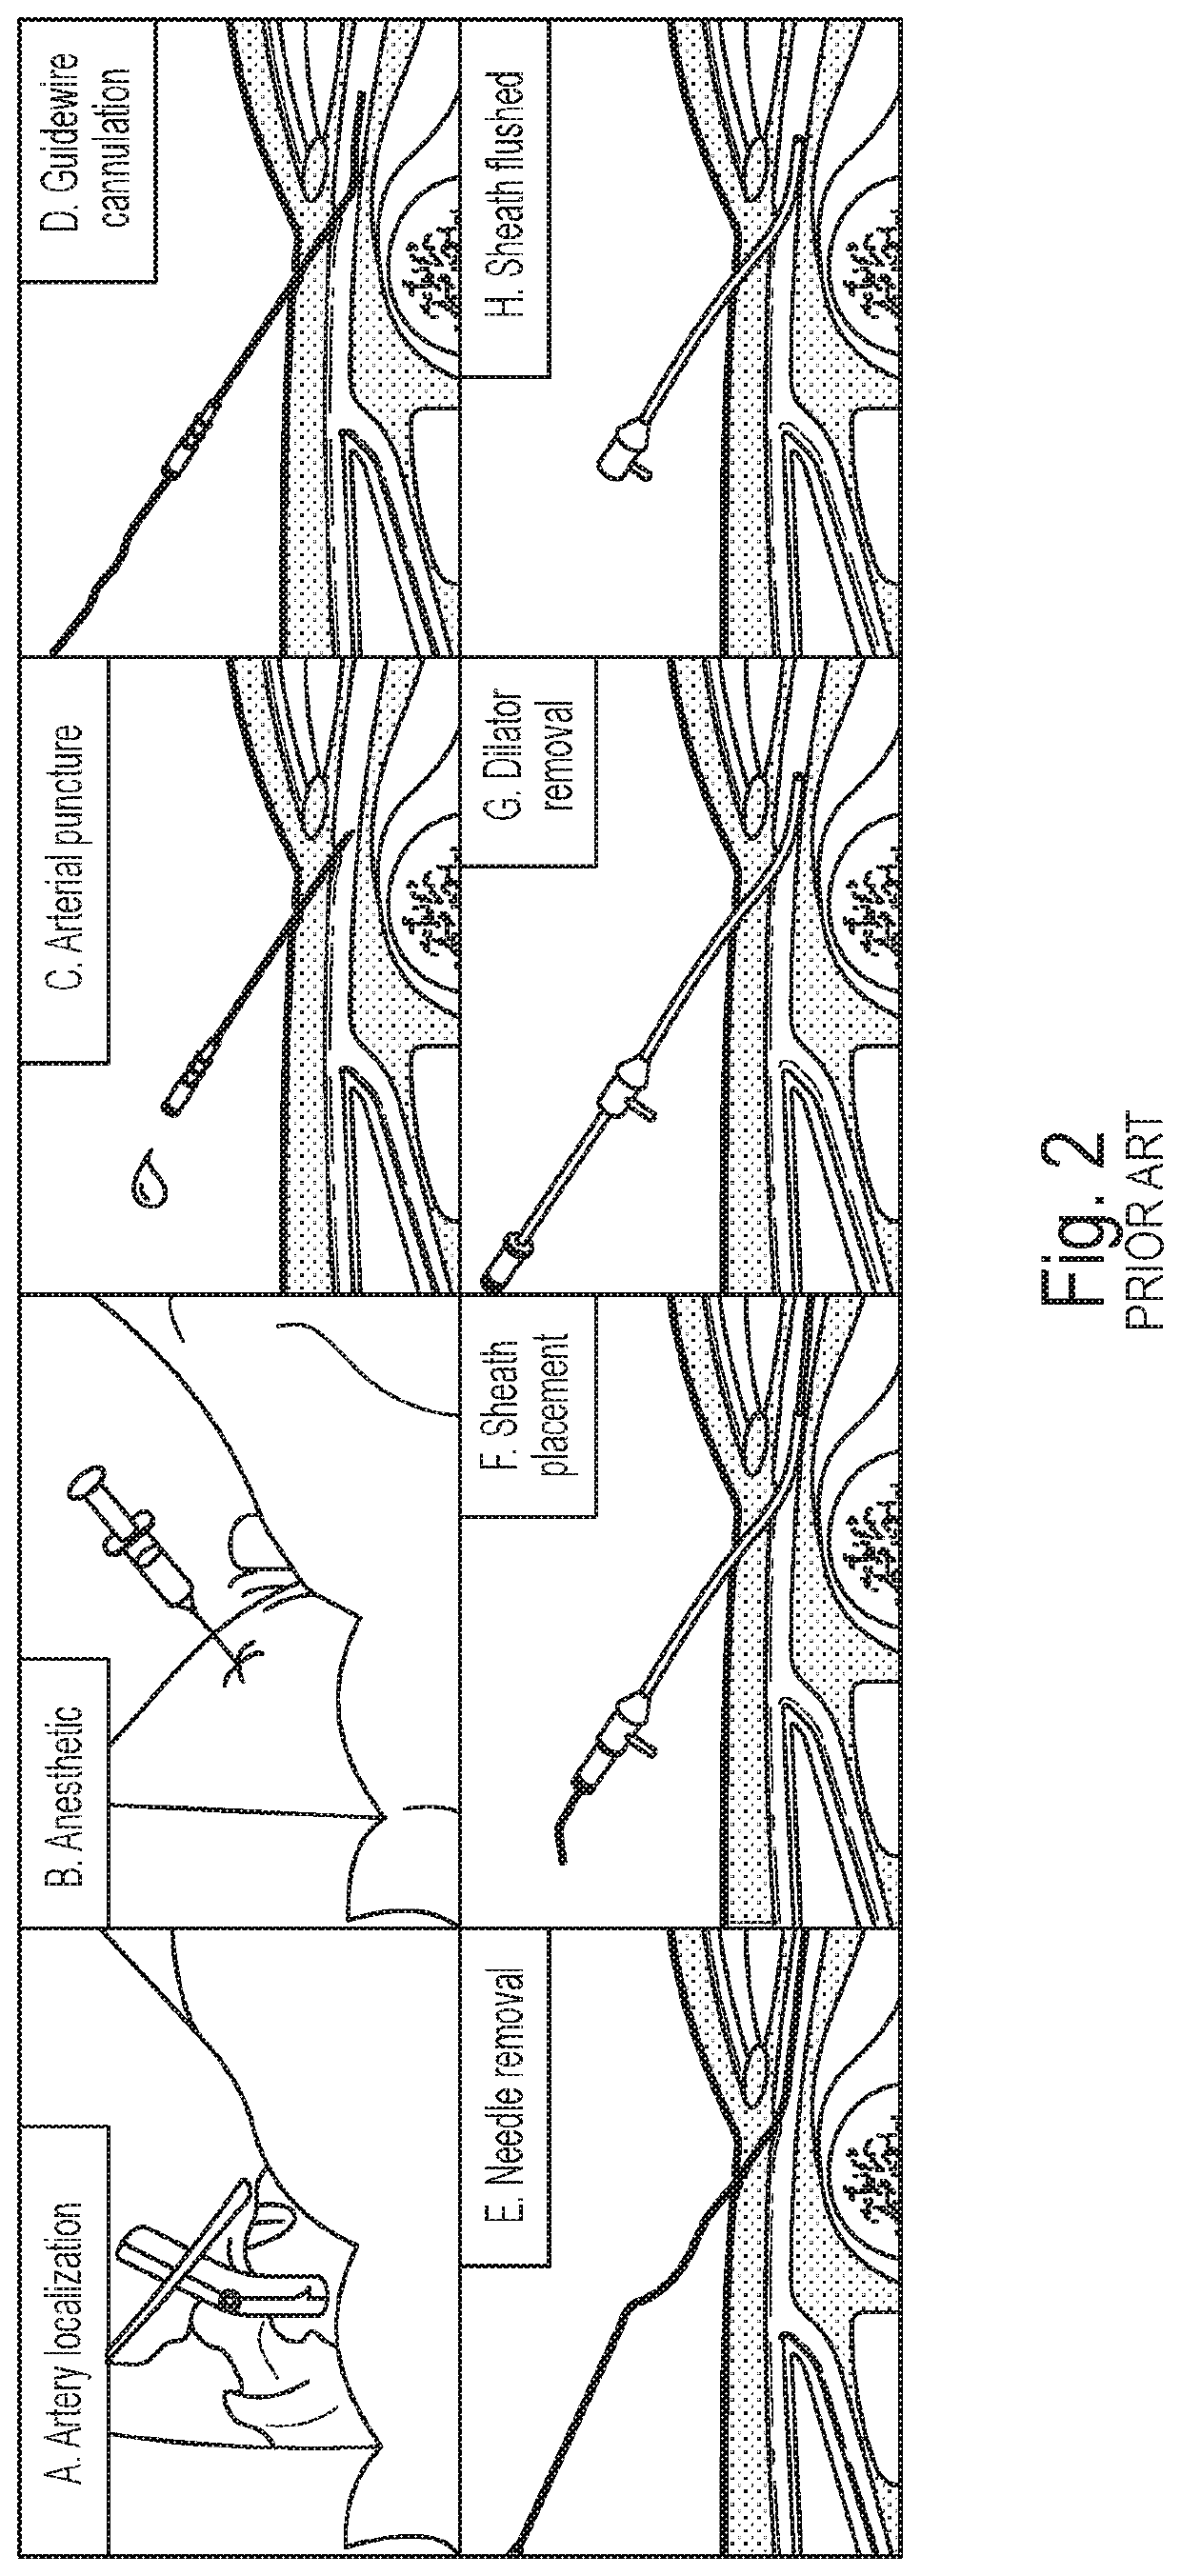 Device and method for automated emergency arterial sheath placement